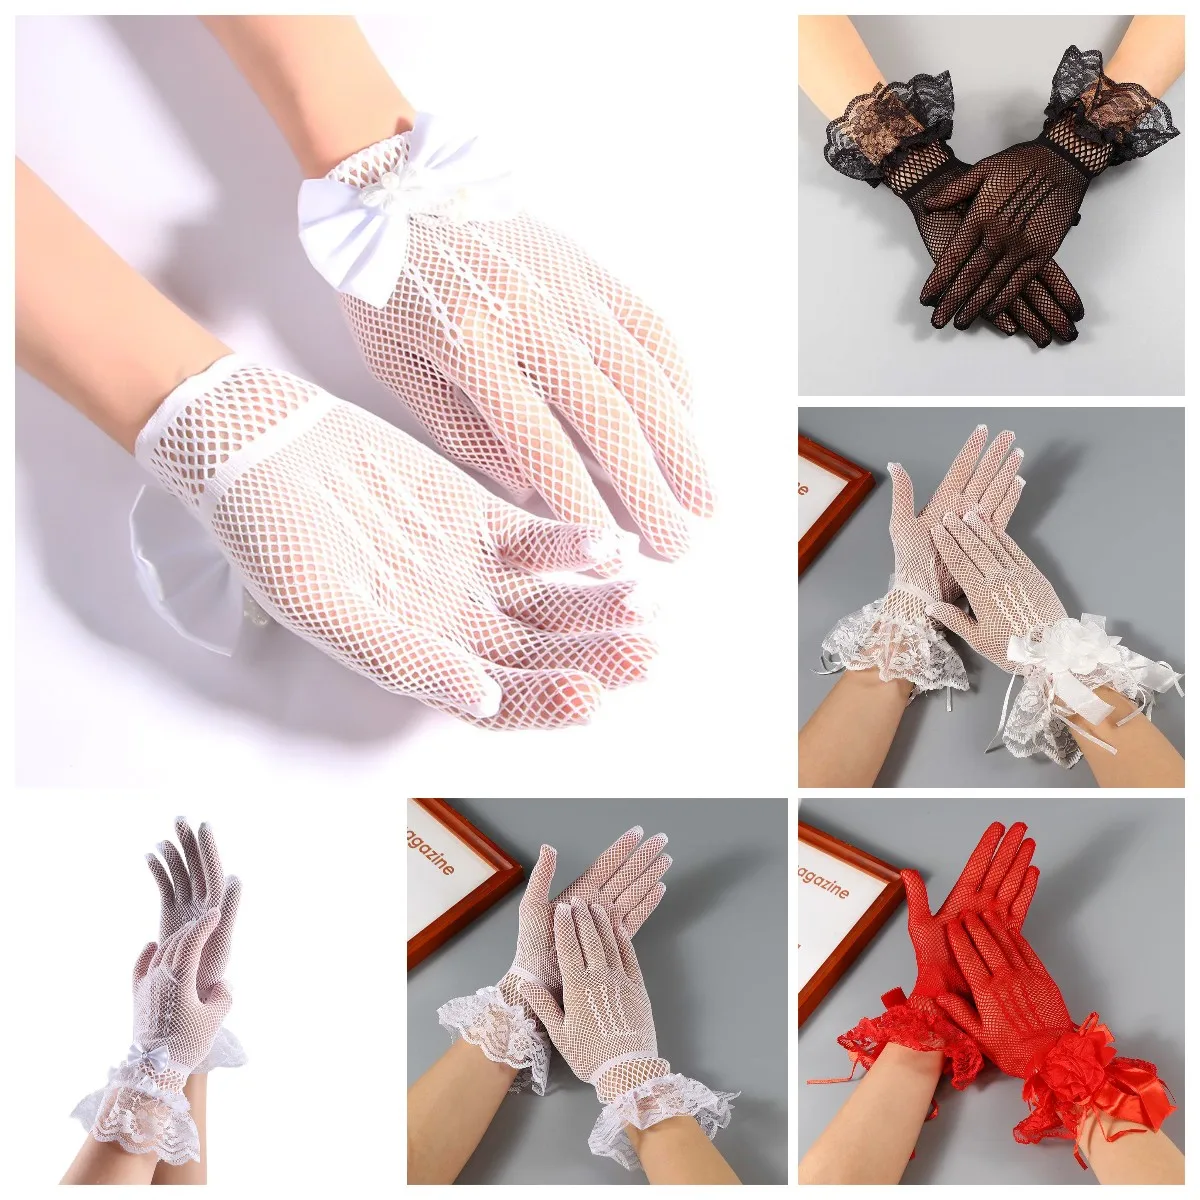 

1 Pair Fishnet Five Fingers Gloves Sexy Mesh Lace Bow Dance Gloves Women Wedding Party Mittens Girls Dress Clothing Accessories